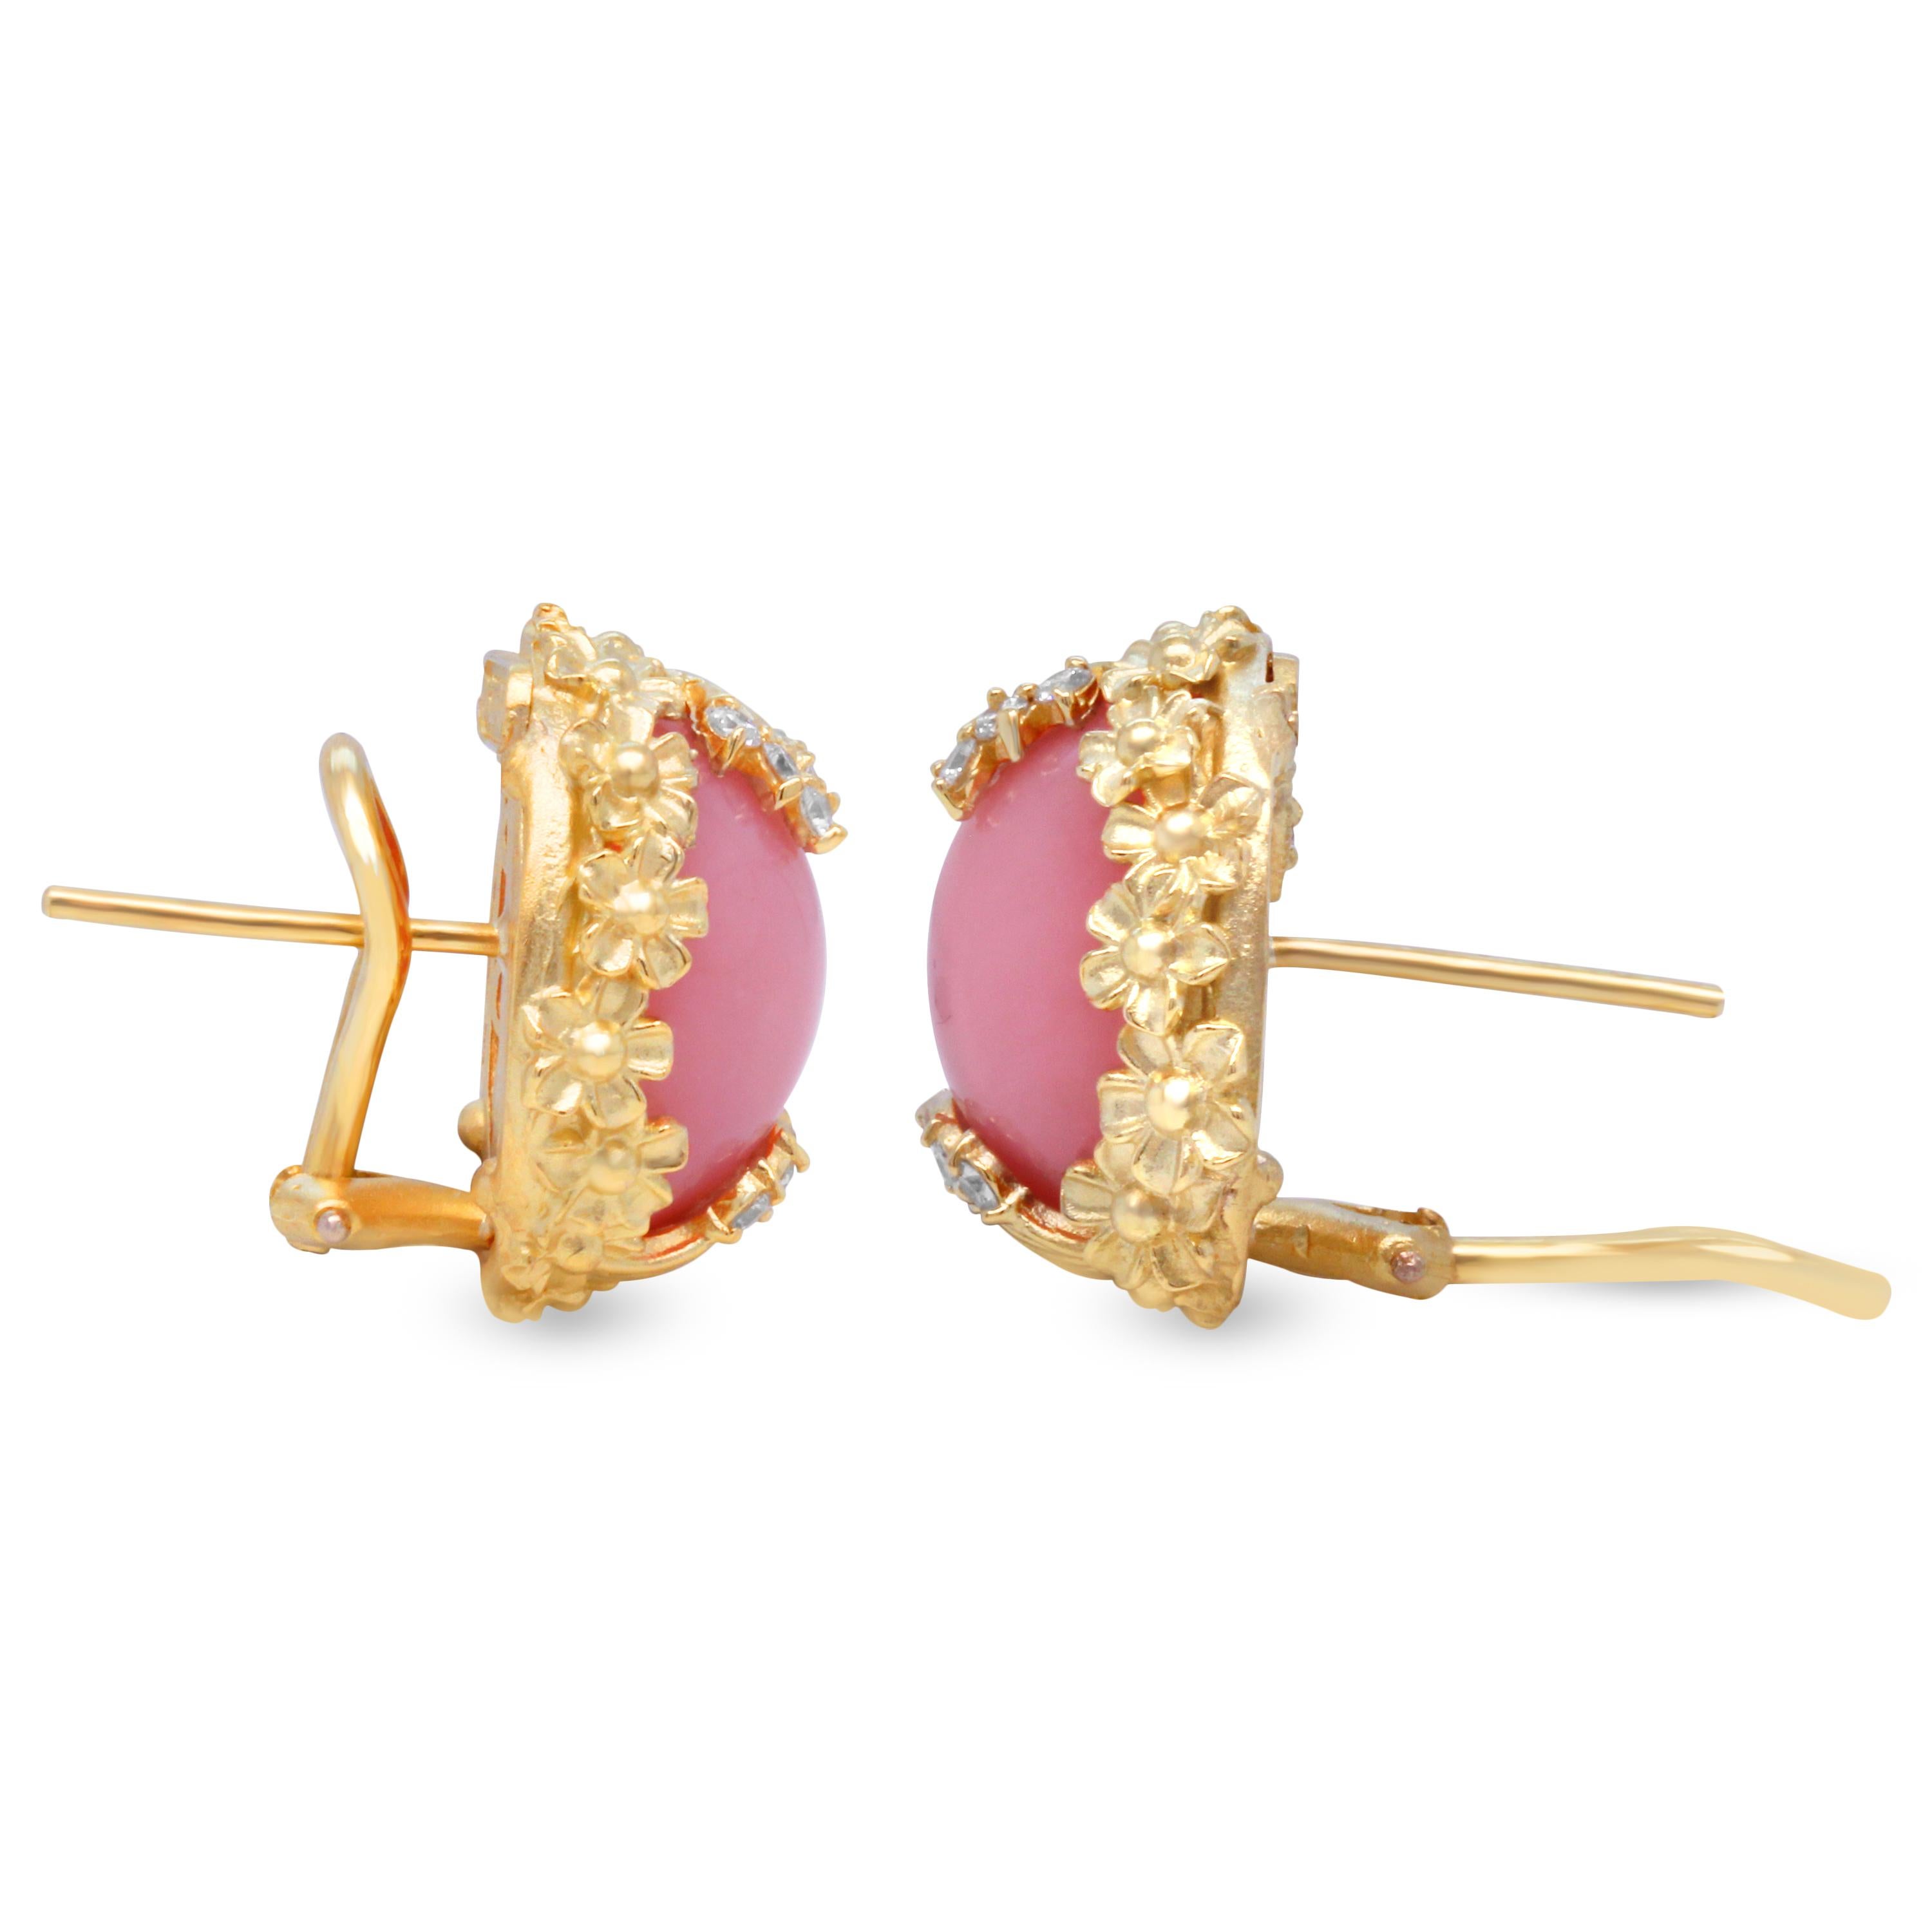 Stambolian 18K Yellow Gold Diamond Peruvian Pink Opal Floral Button Earrings

From the 2021 Spring Collection by Stambolian, these floral style earrings feature two oval-cut, Pink Peruvian Opal centers with a diamond leaf on the top and bottom.